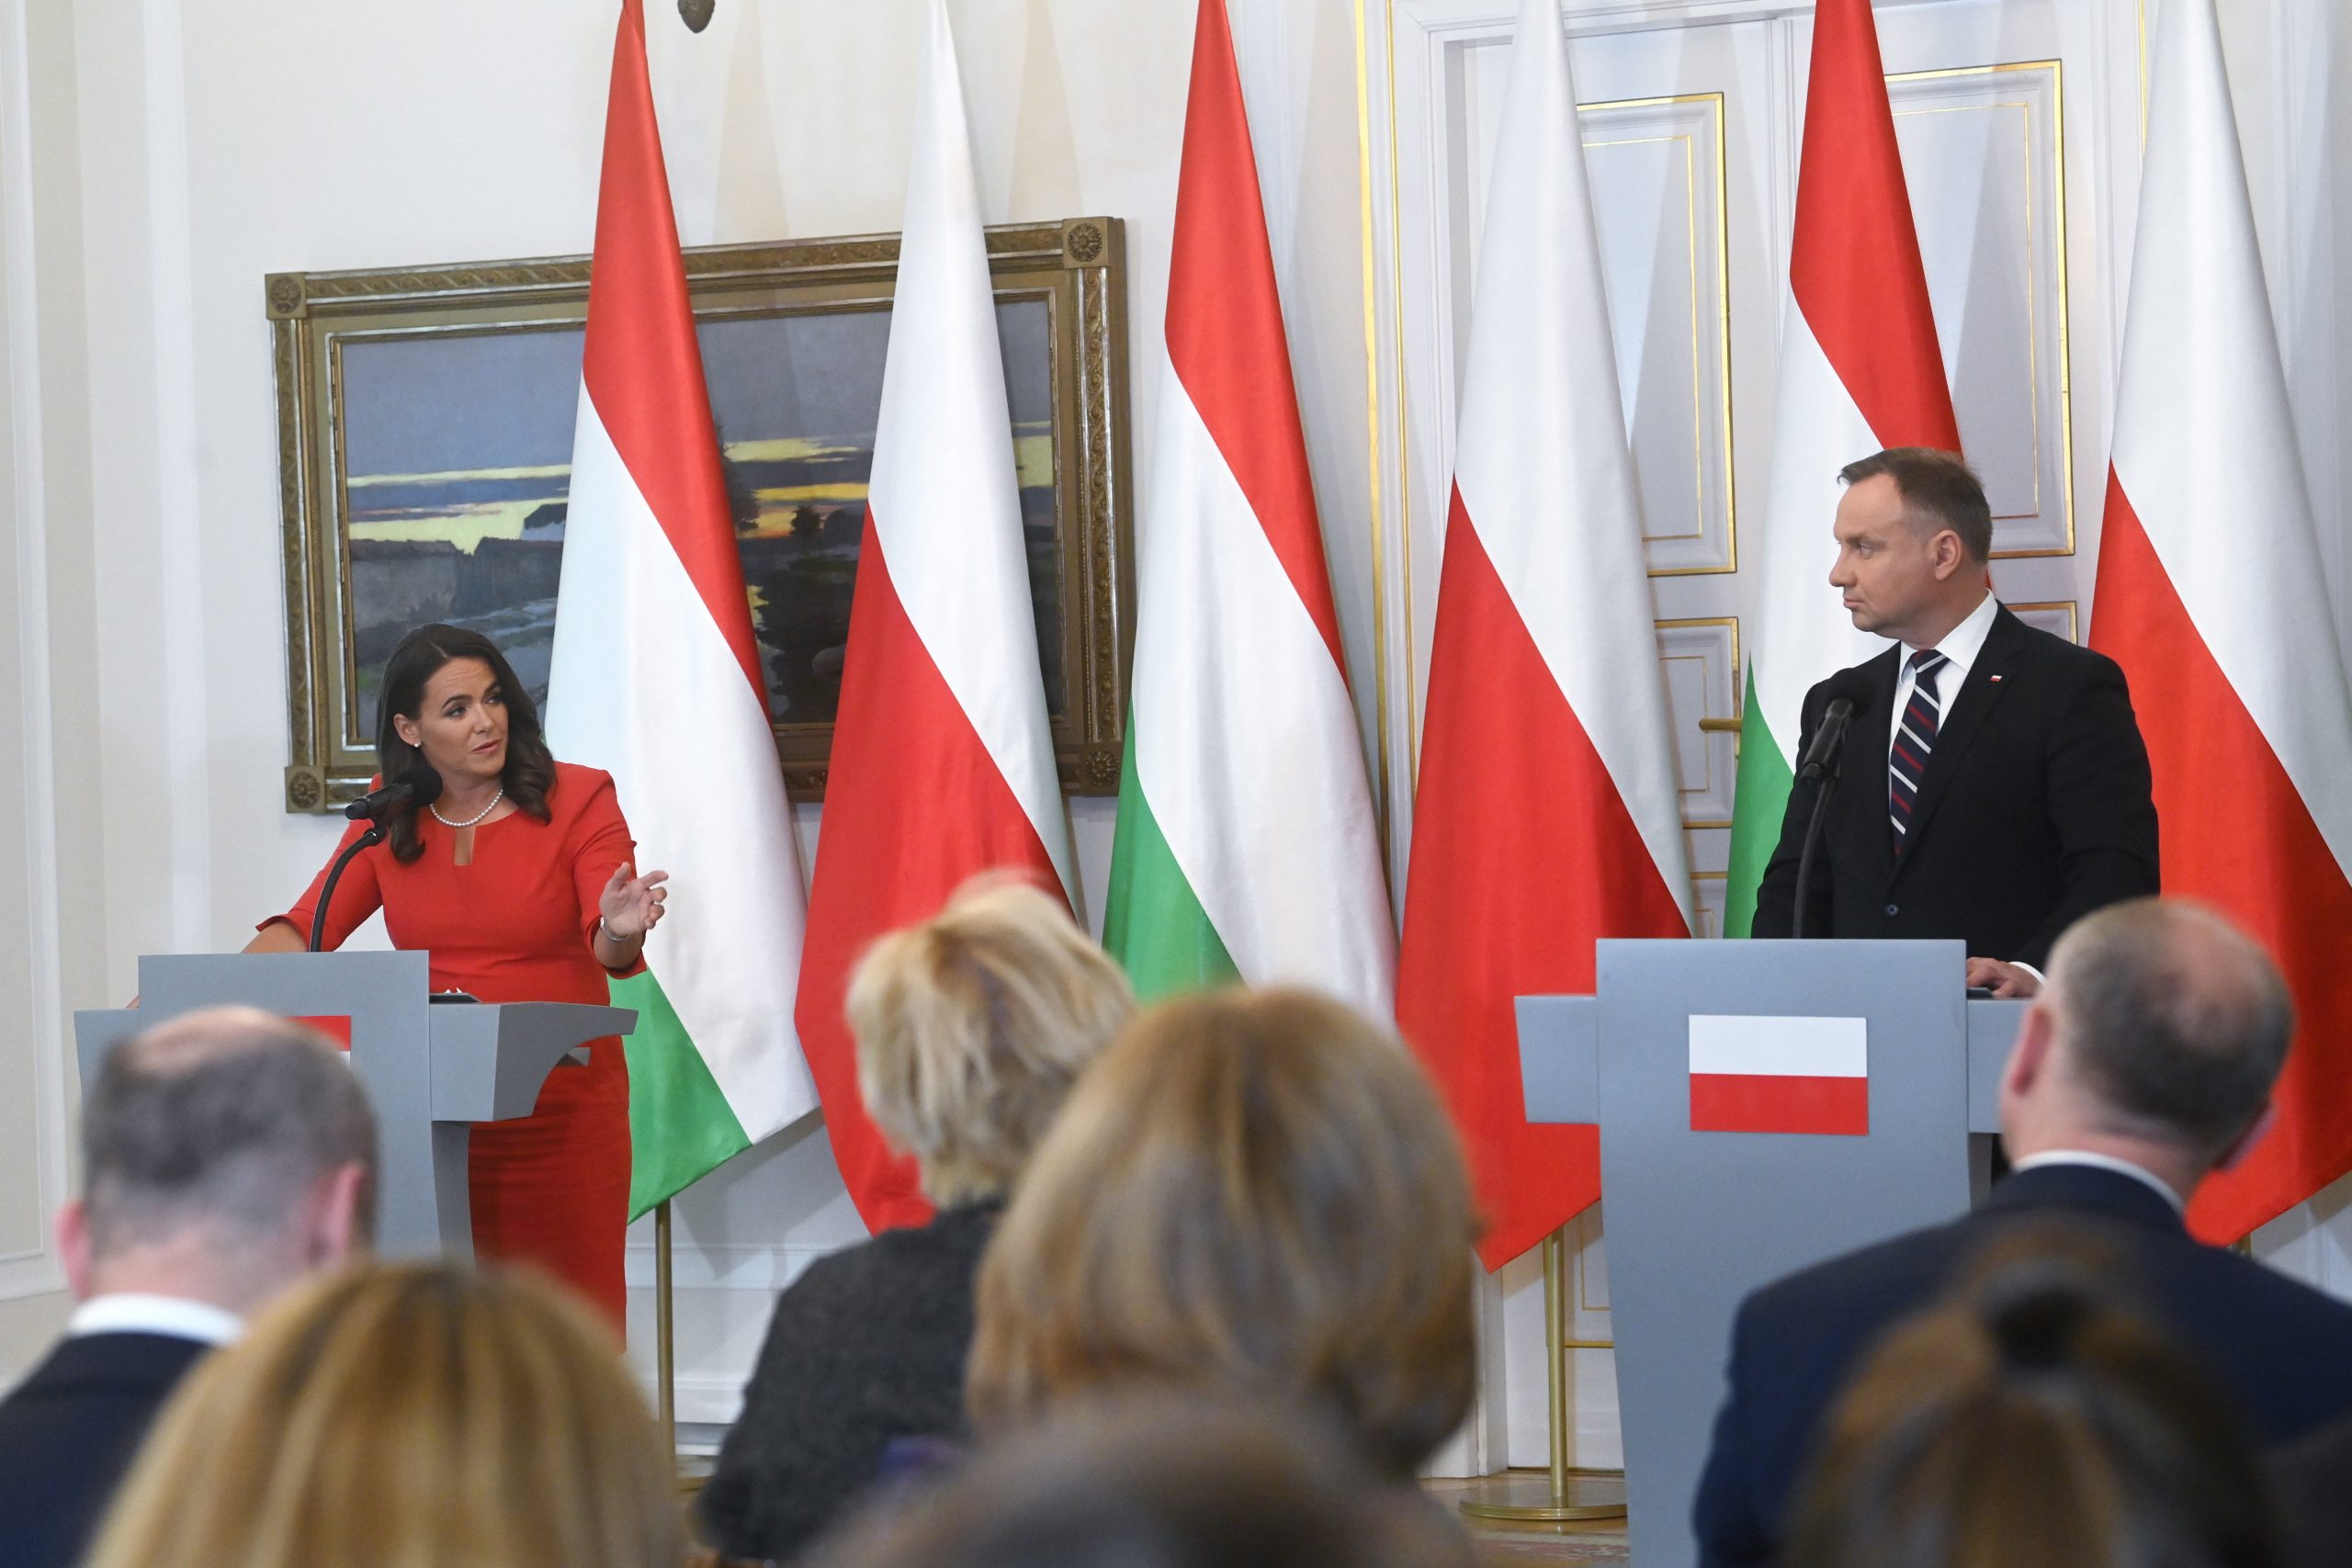 President Novák: Hungary, Poland Call on EC to Make Available Allocations Due from Reconstruction Fund